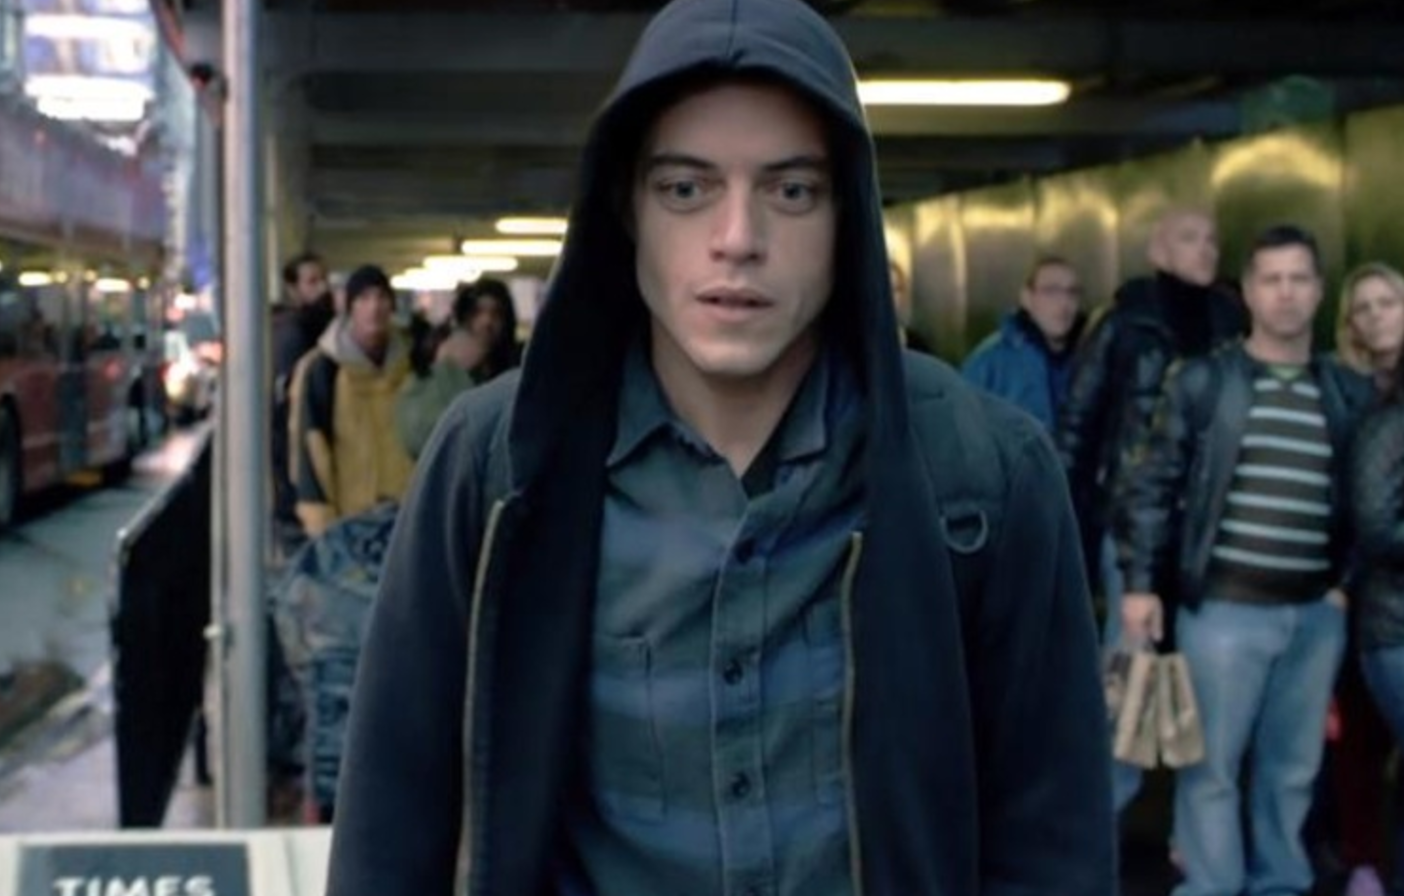 Five Reasons Mr. Robot Is One Of The Most Exciting Shows